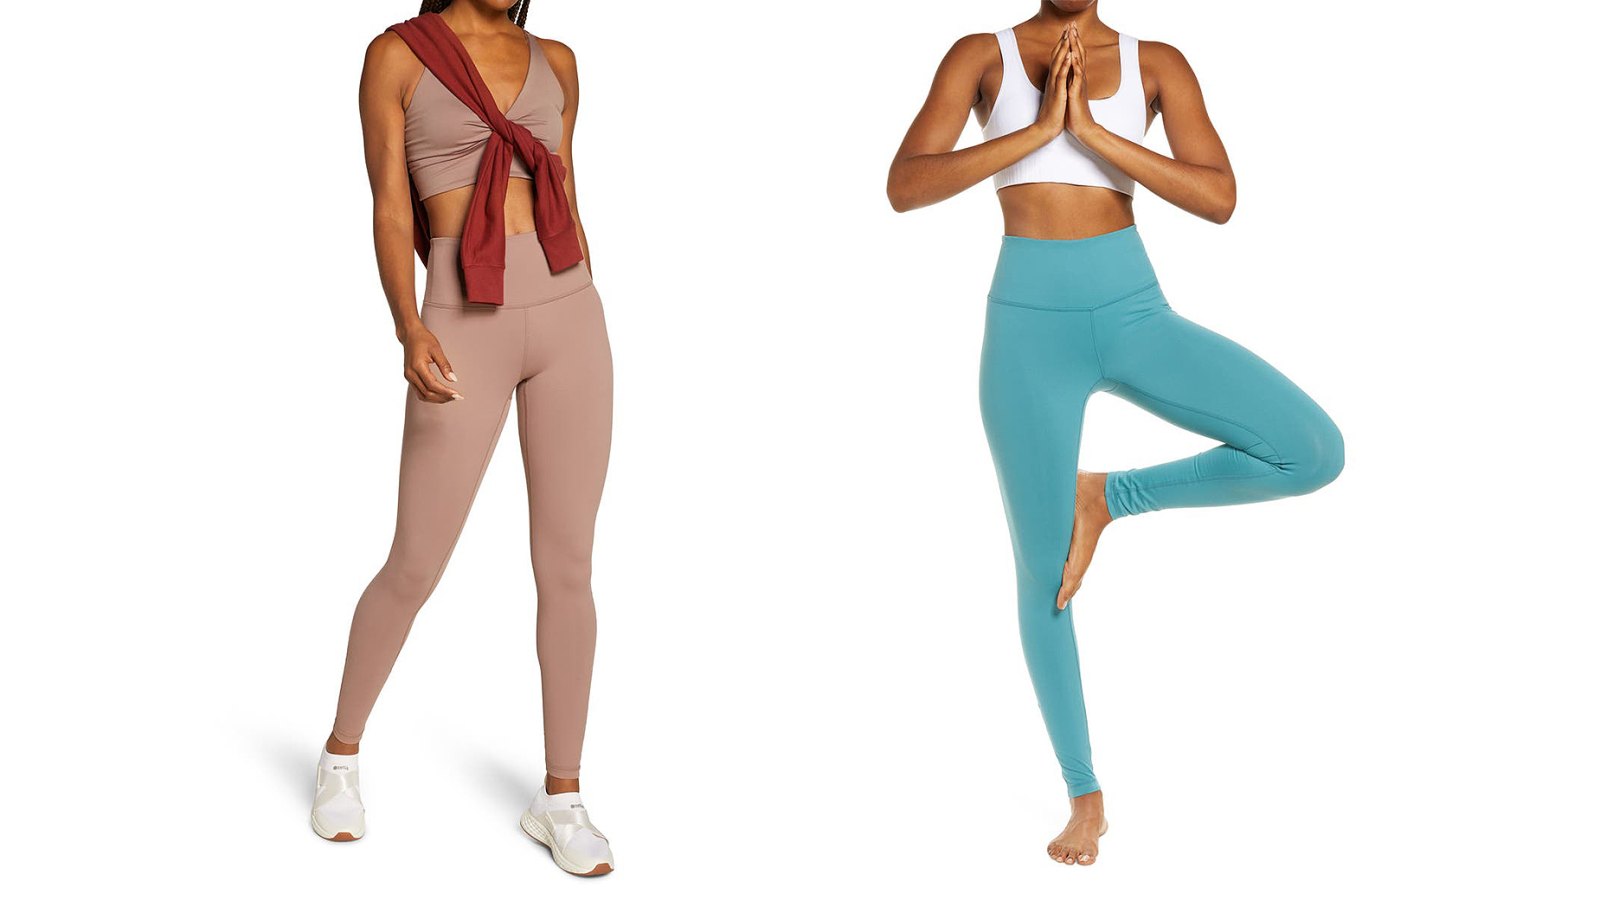 Zella's Iconic Live In Leggings Now Come in New Colors